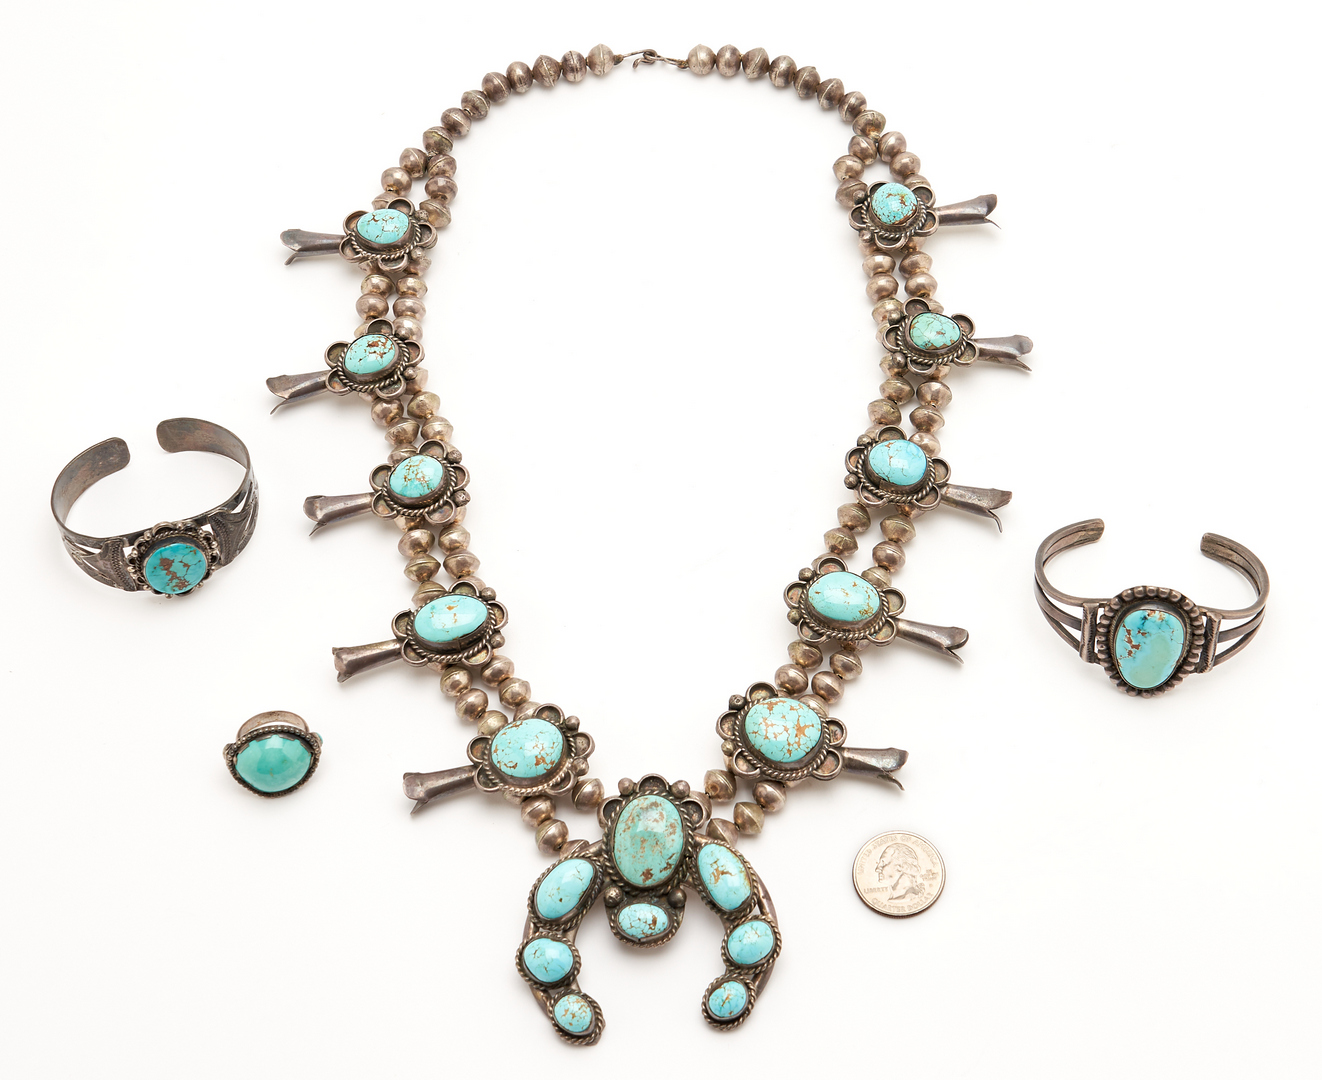 Lot 1098: 4 Native American Silver & Turquoise Jewelry Items